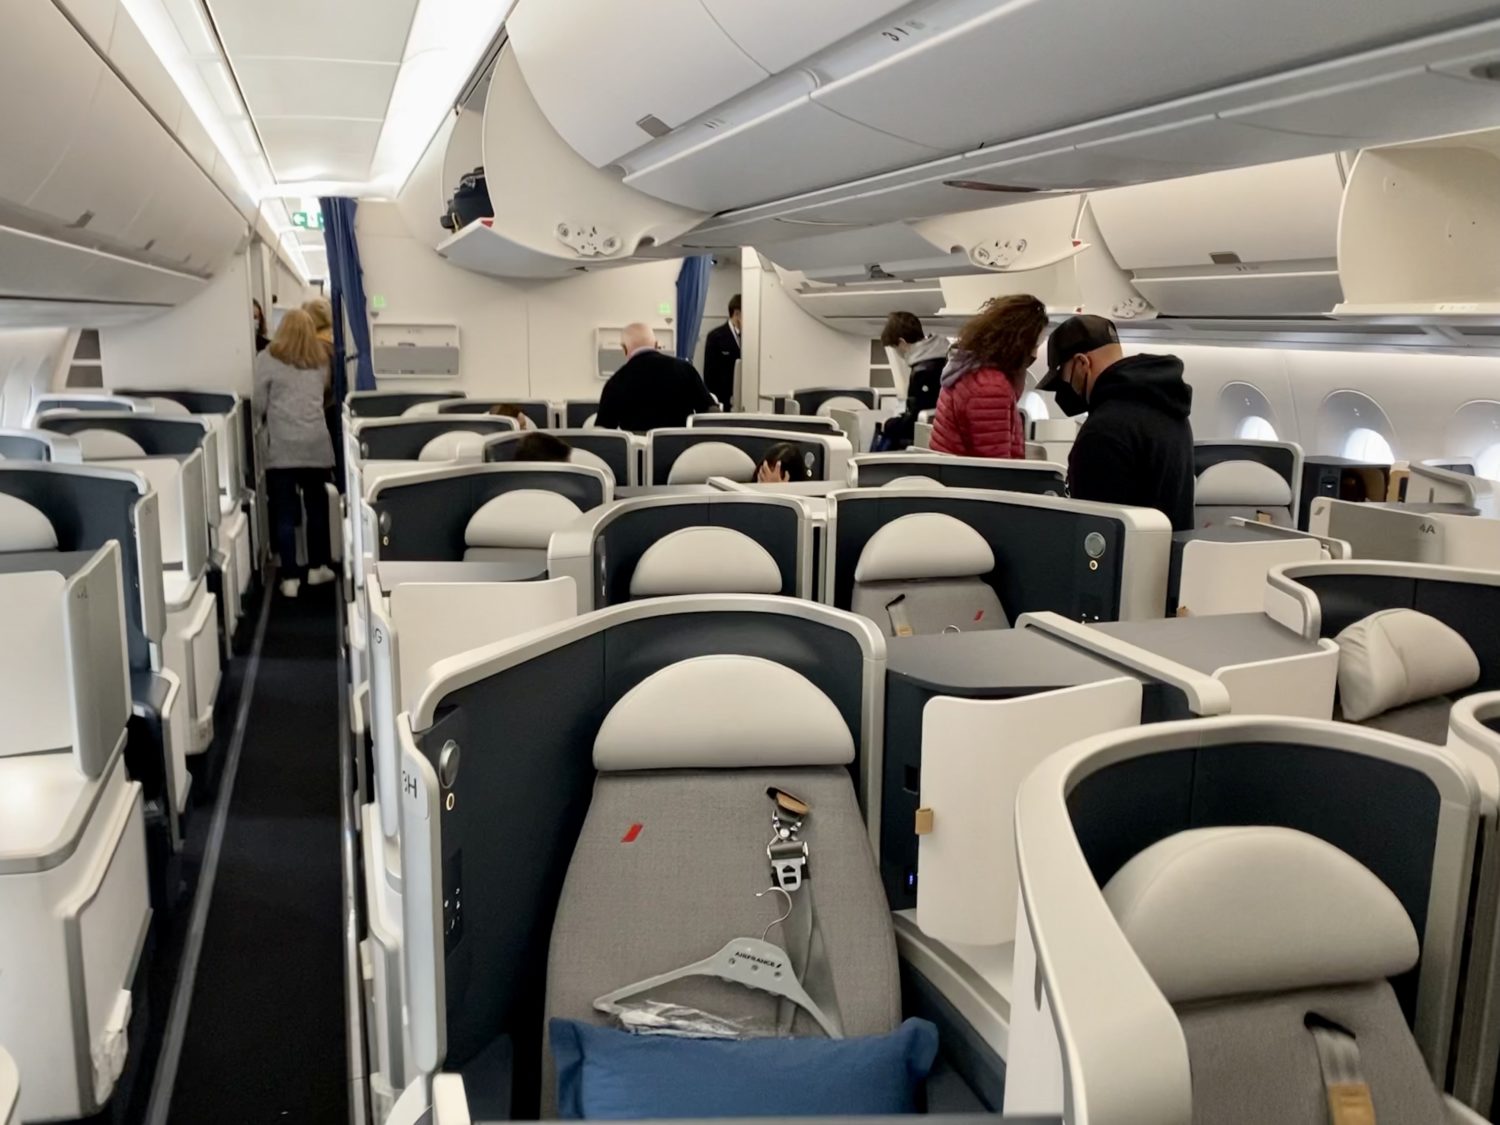 air france business class cabin  Ends Soon: 20% Capital One Transfer Bonus to British Airways, Air France/KLM &#8211; Thrifty Traveler air france business class cabin scaled